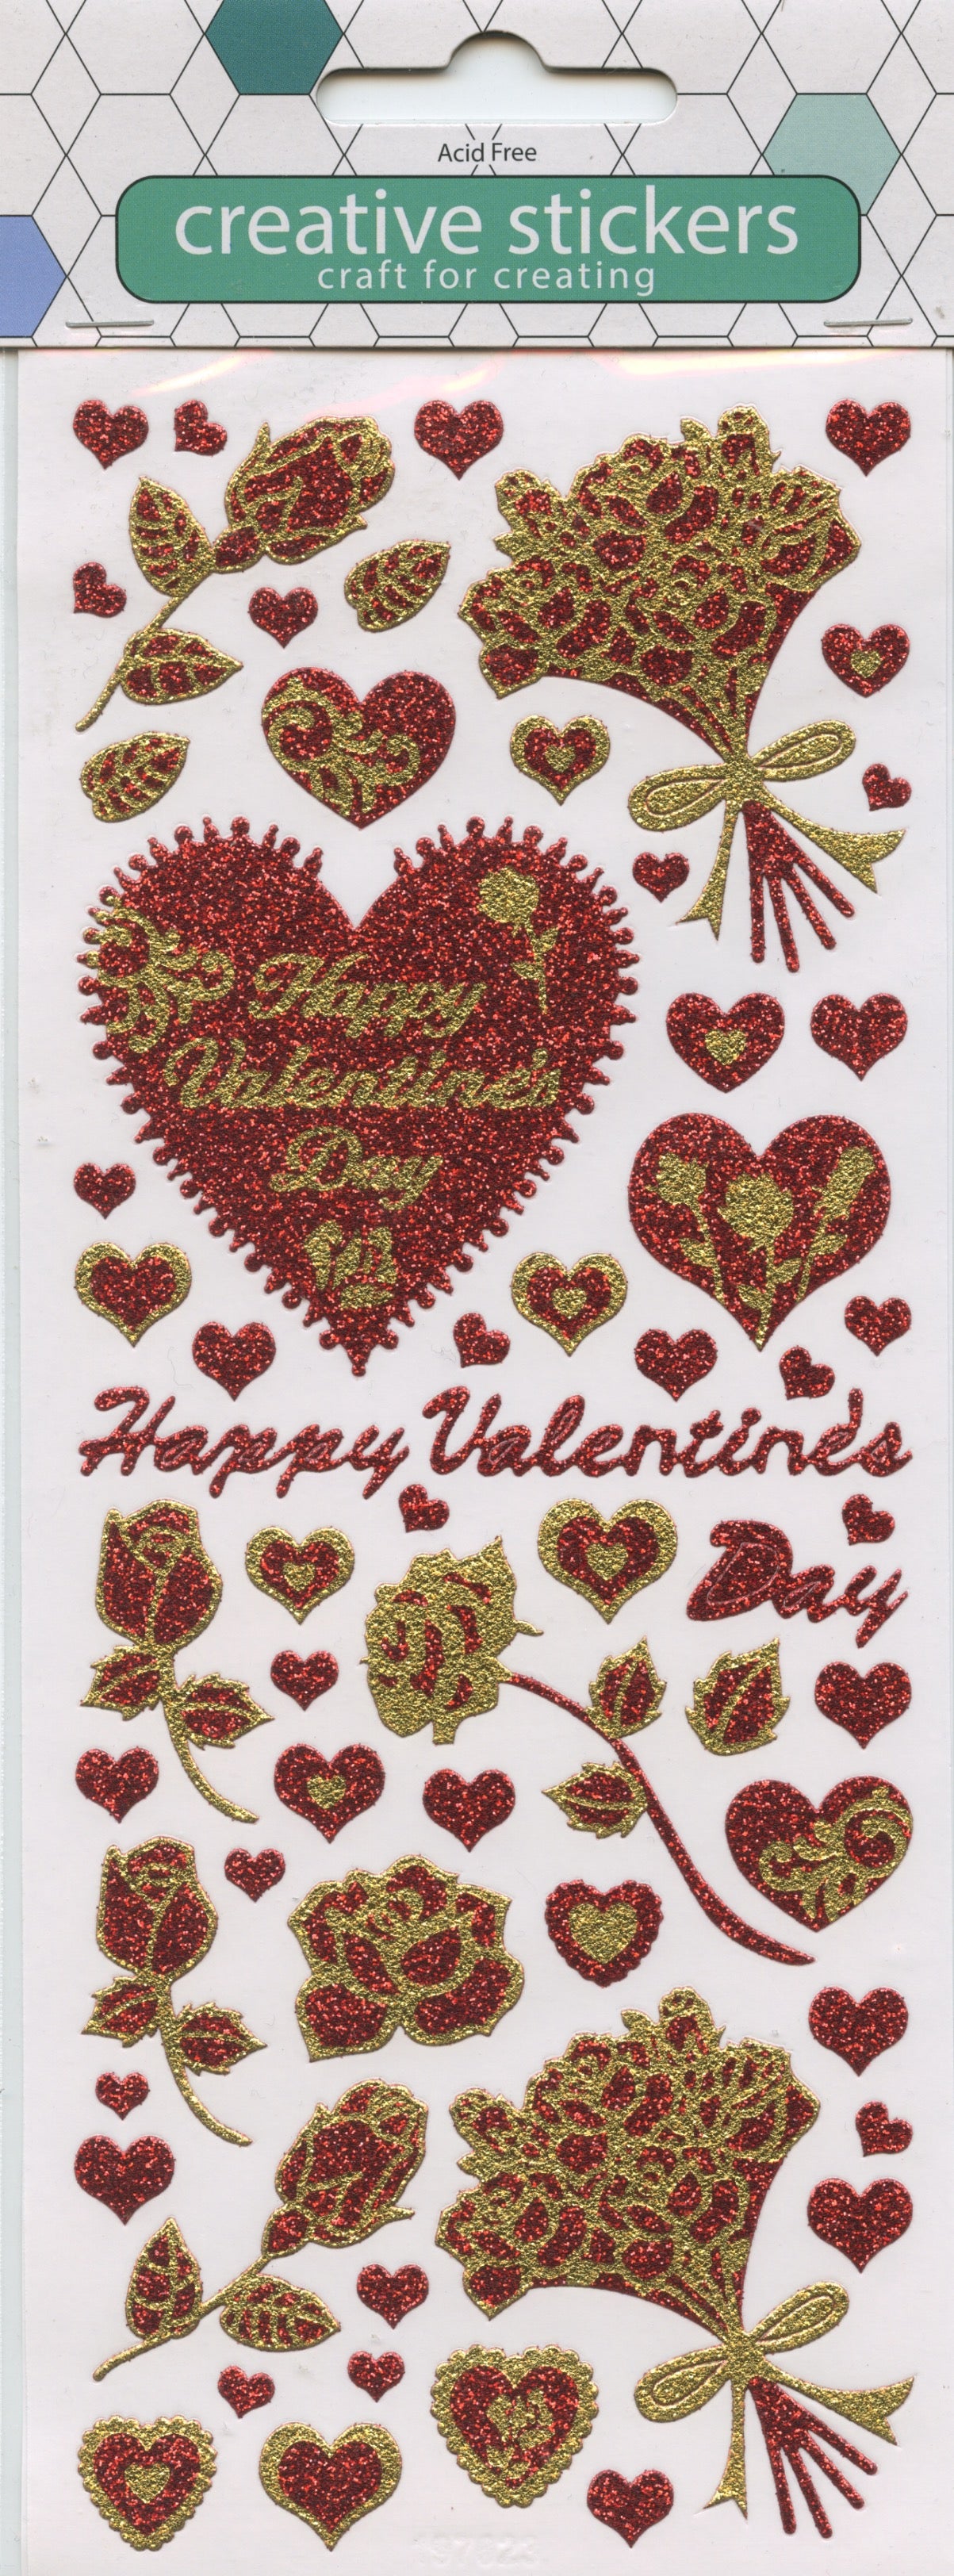 Happy Valentines Day - Love hearts/Roses - Craft Stickers 62pk